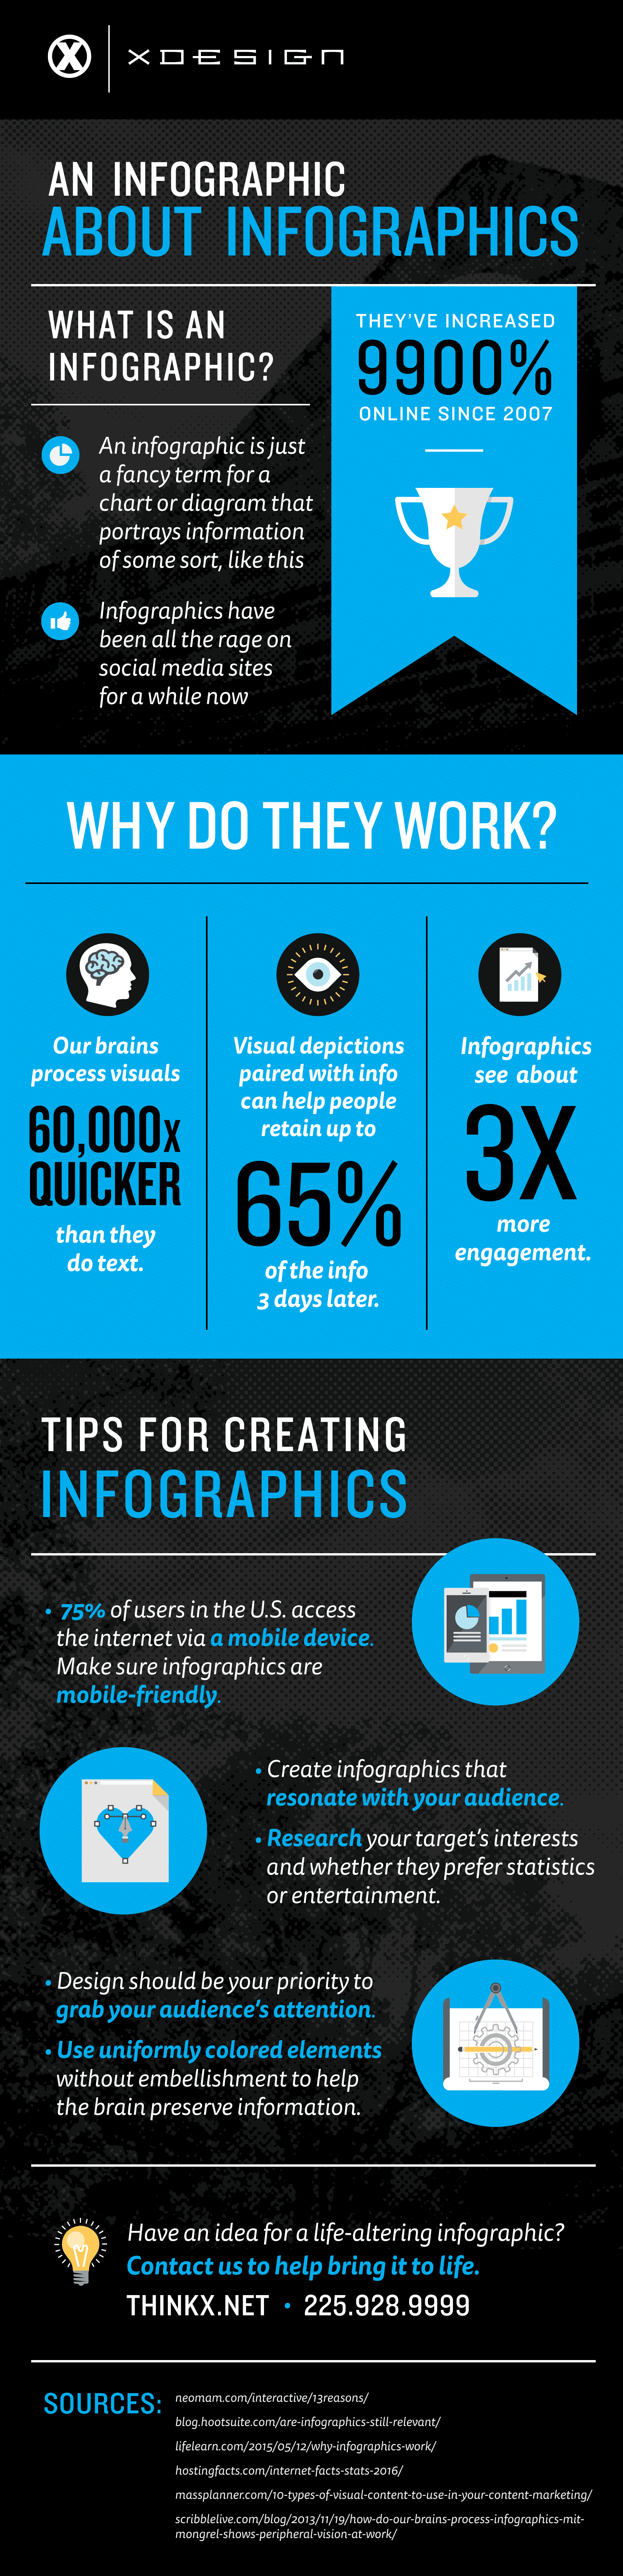 An Infographic about Infographics